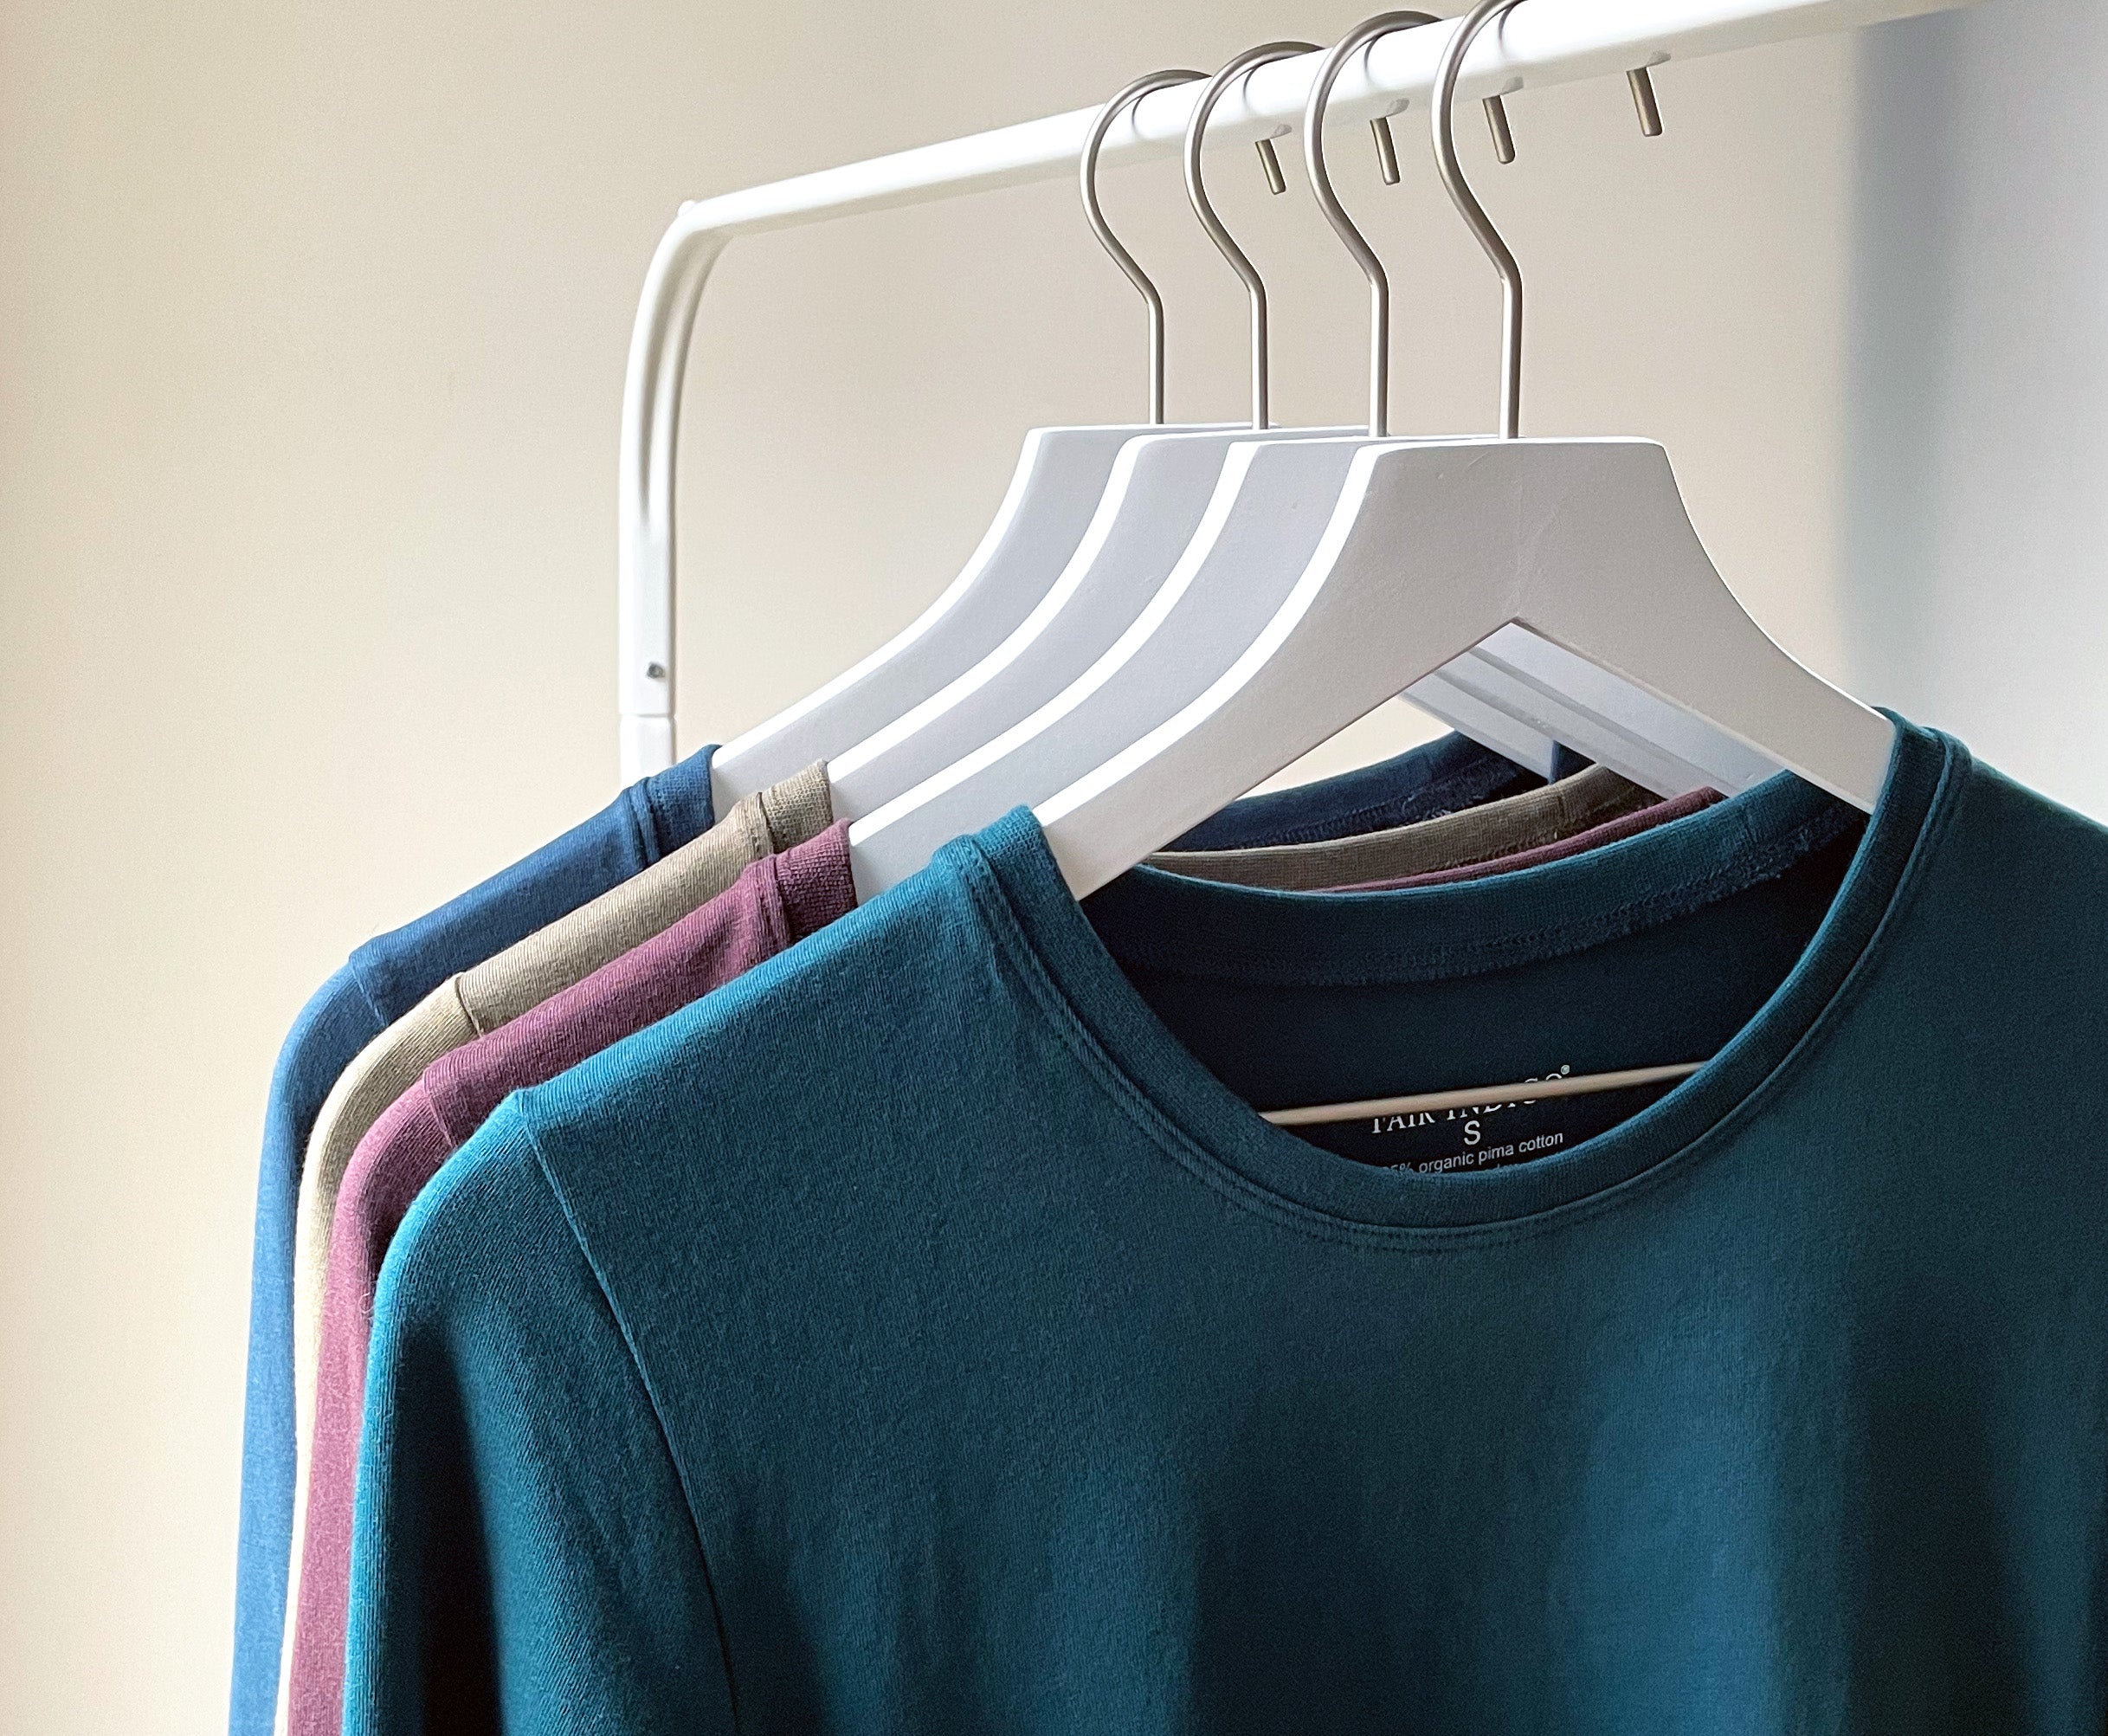 5 Tips to Prevent Cotton Clothing from Shrinking in the Dryer